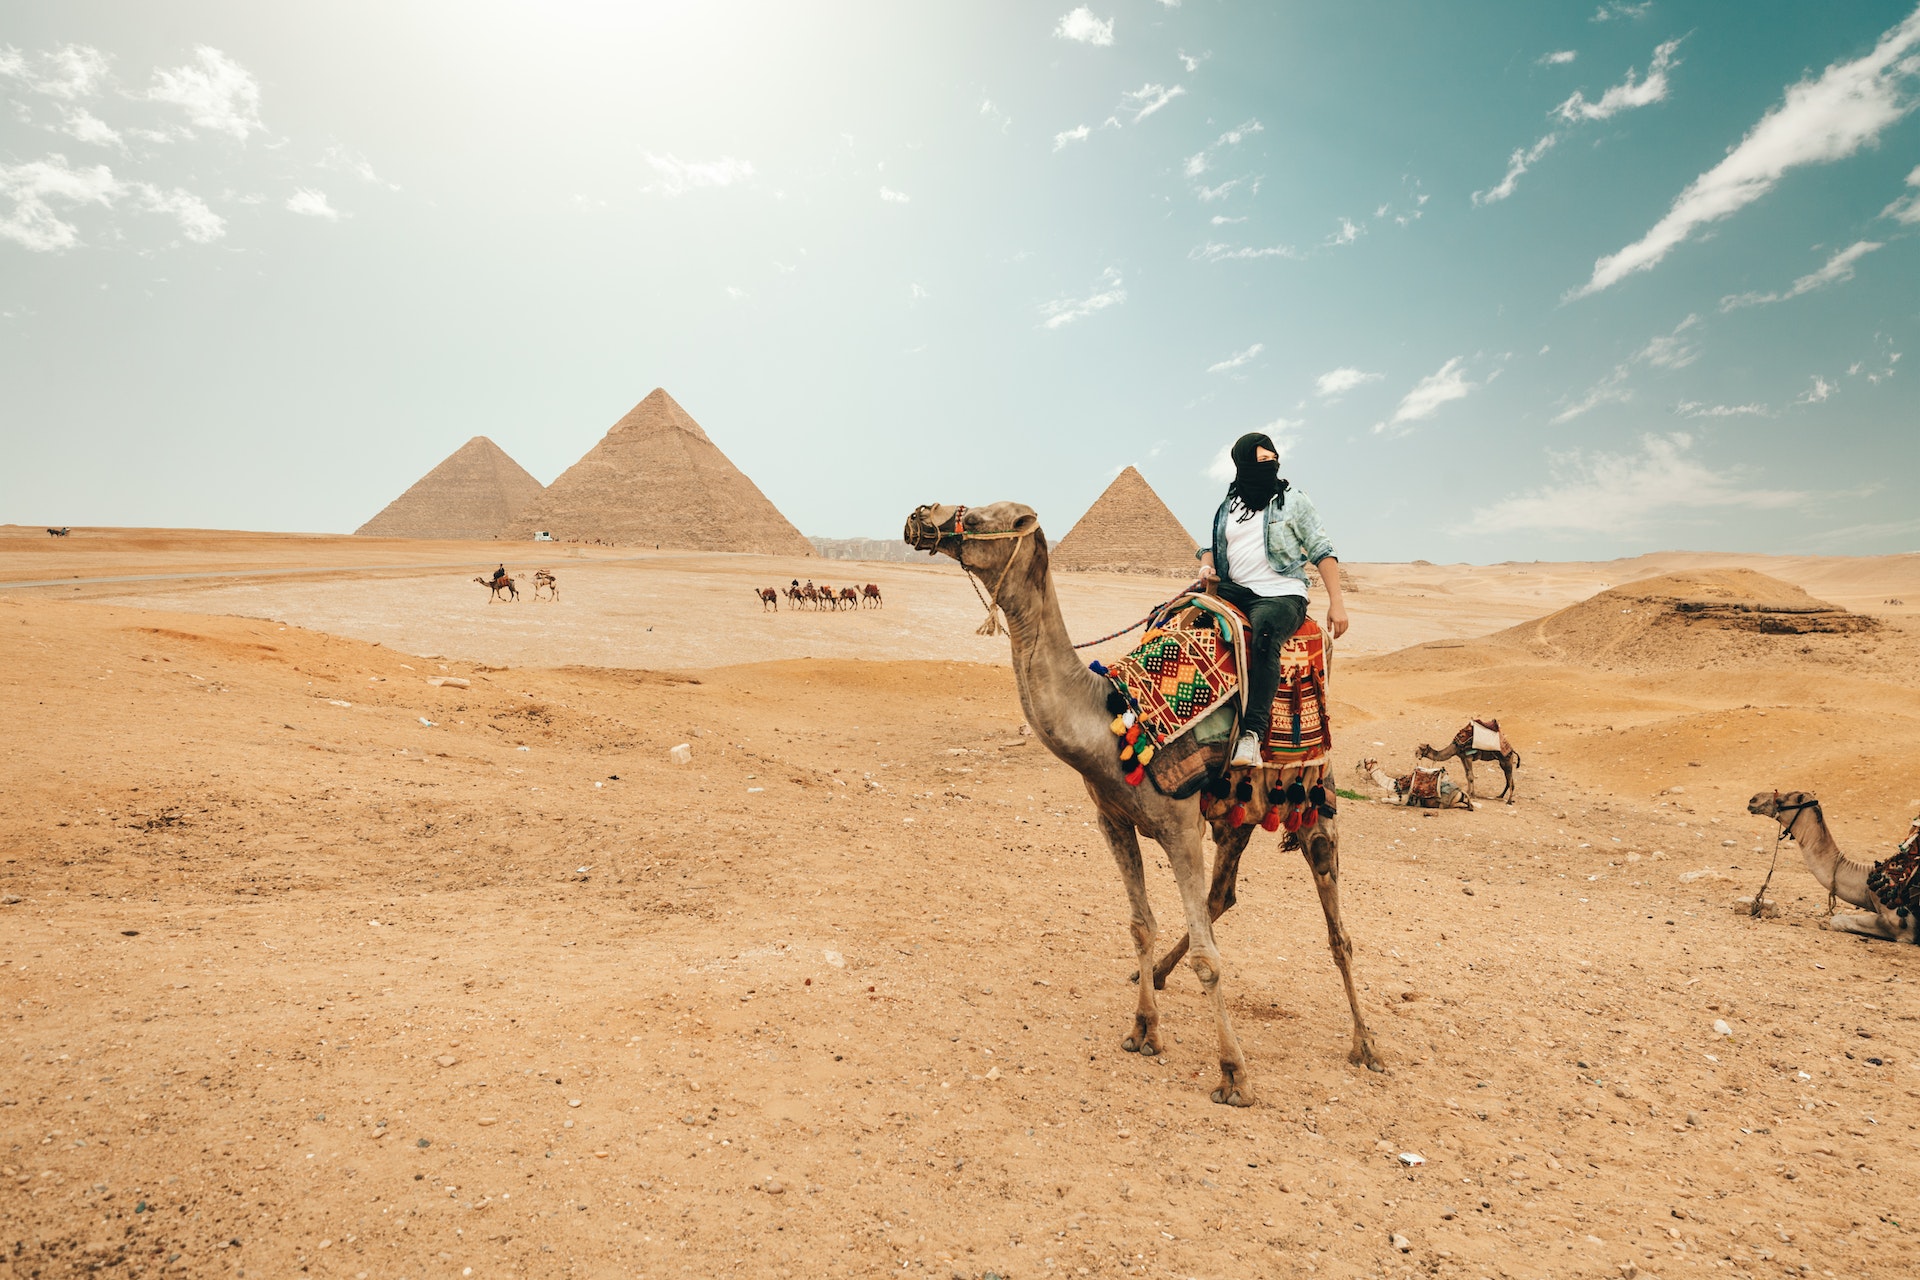 A Day of Discovery: Unveiling the Egyptian Pyramids in Giza, Egypt